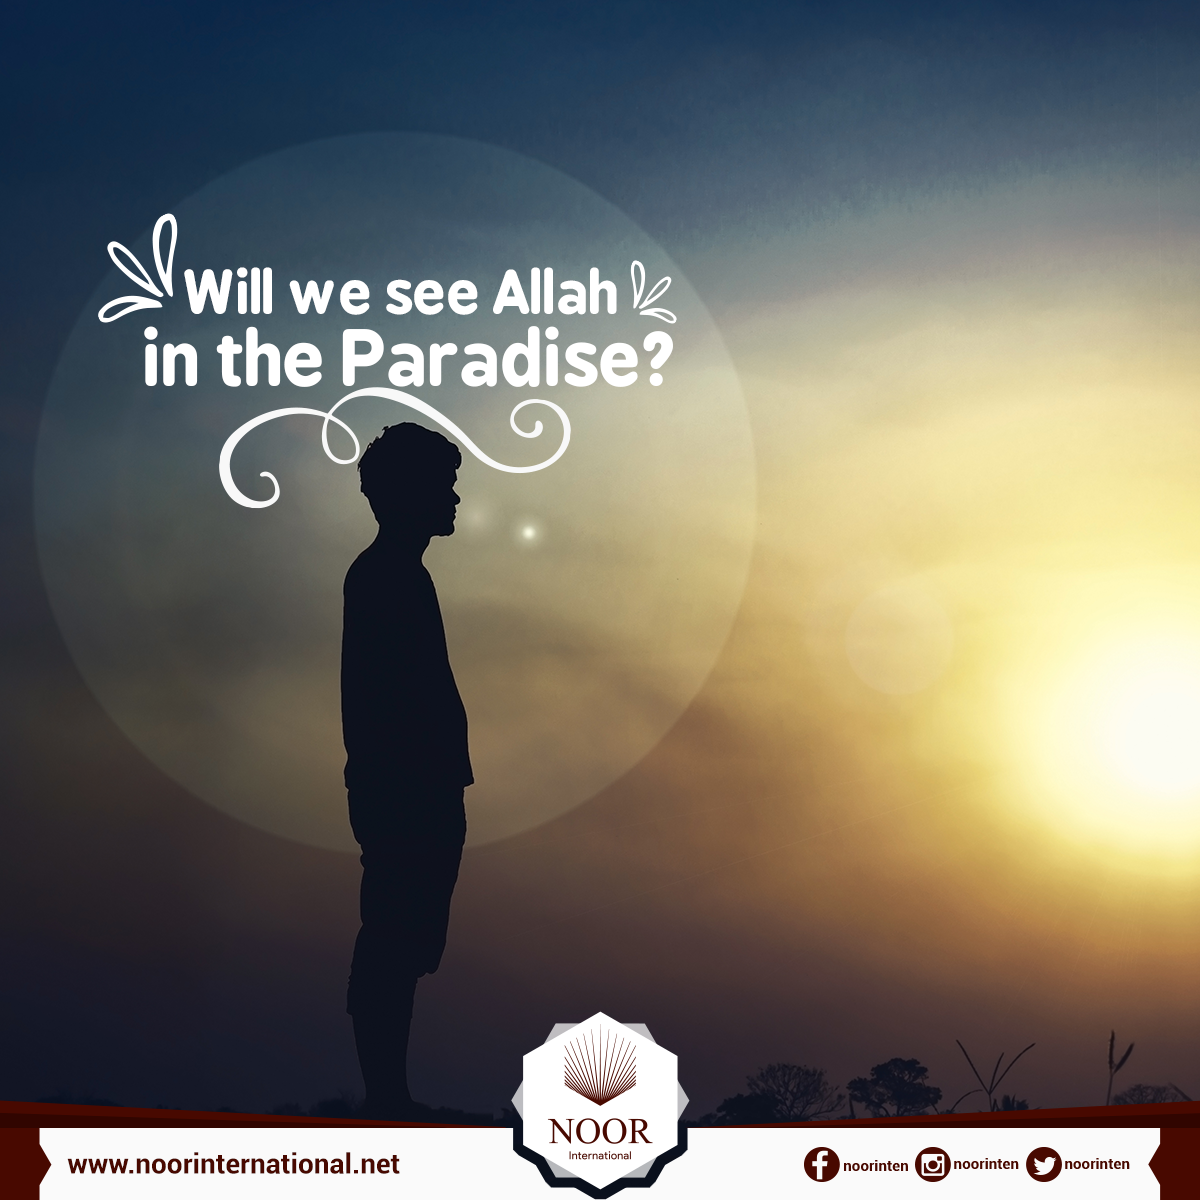 Will we see Allah in the Paradise?